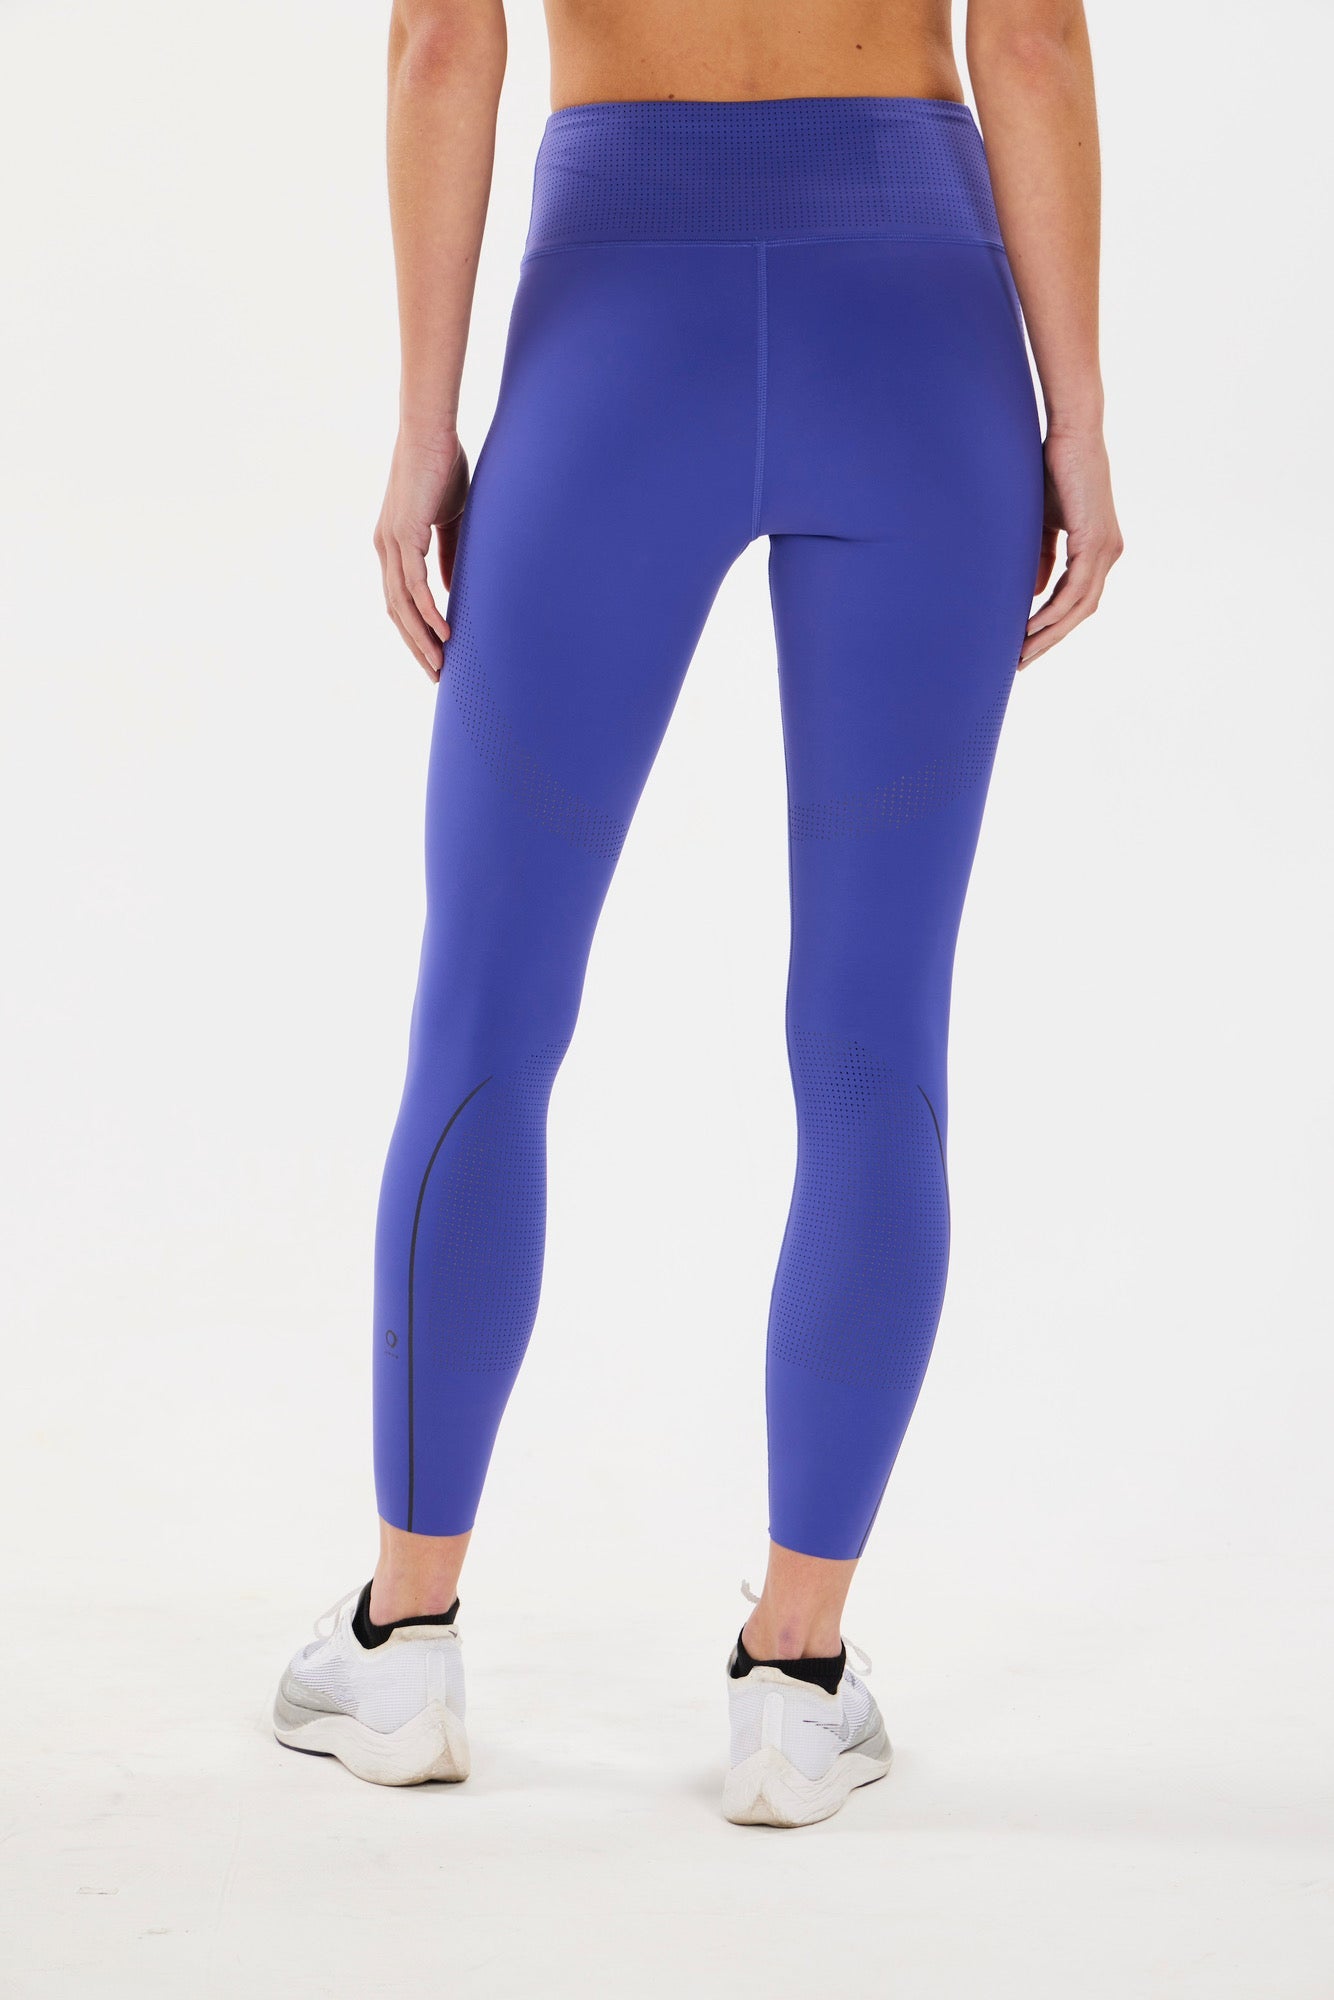 ALRN 7/8 PERFORATED TIGHT